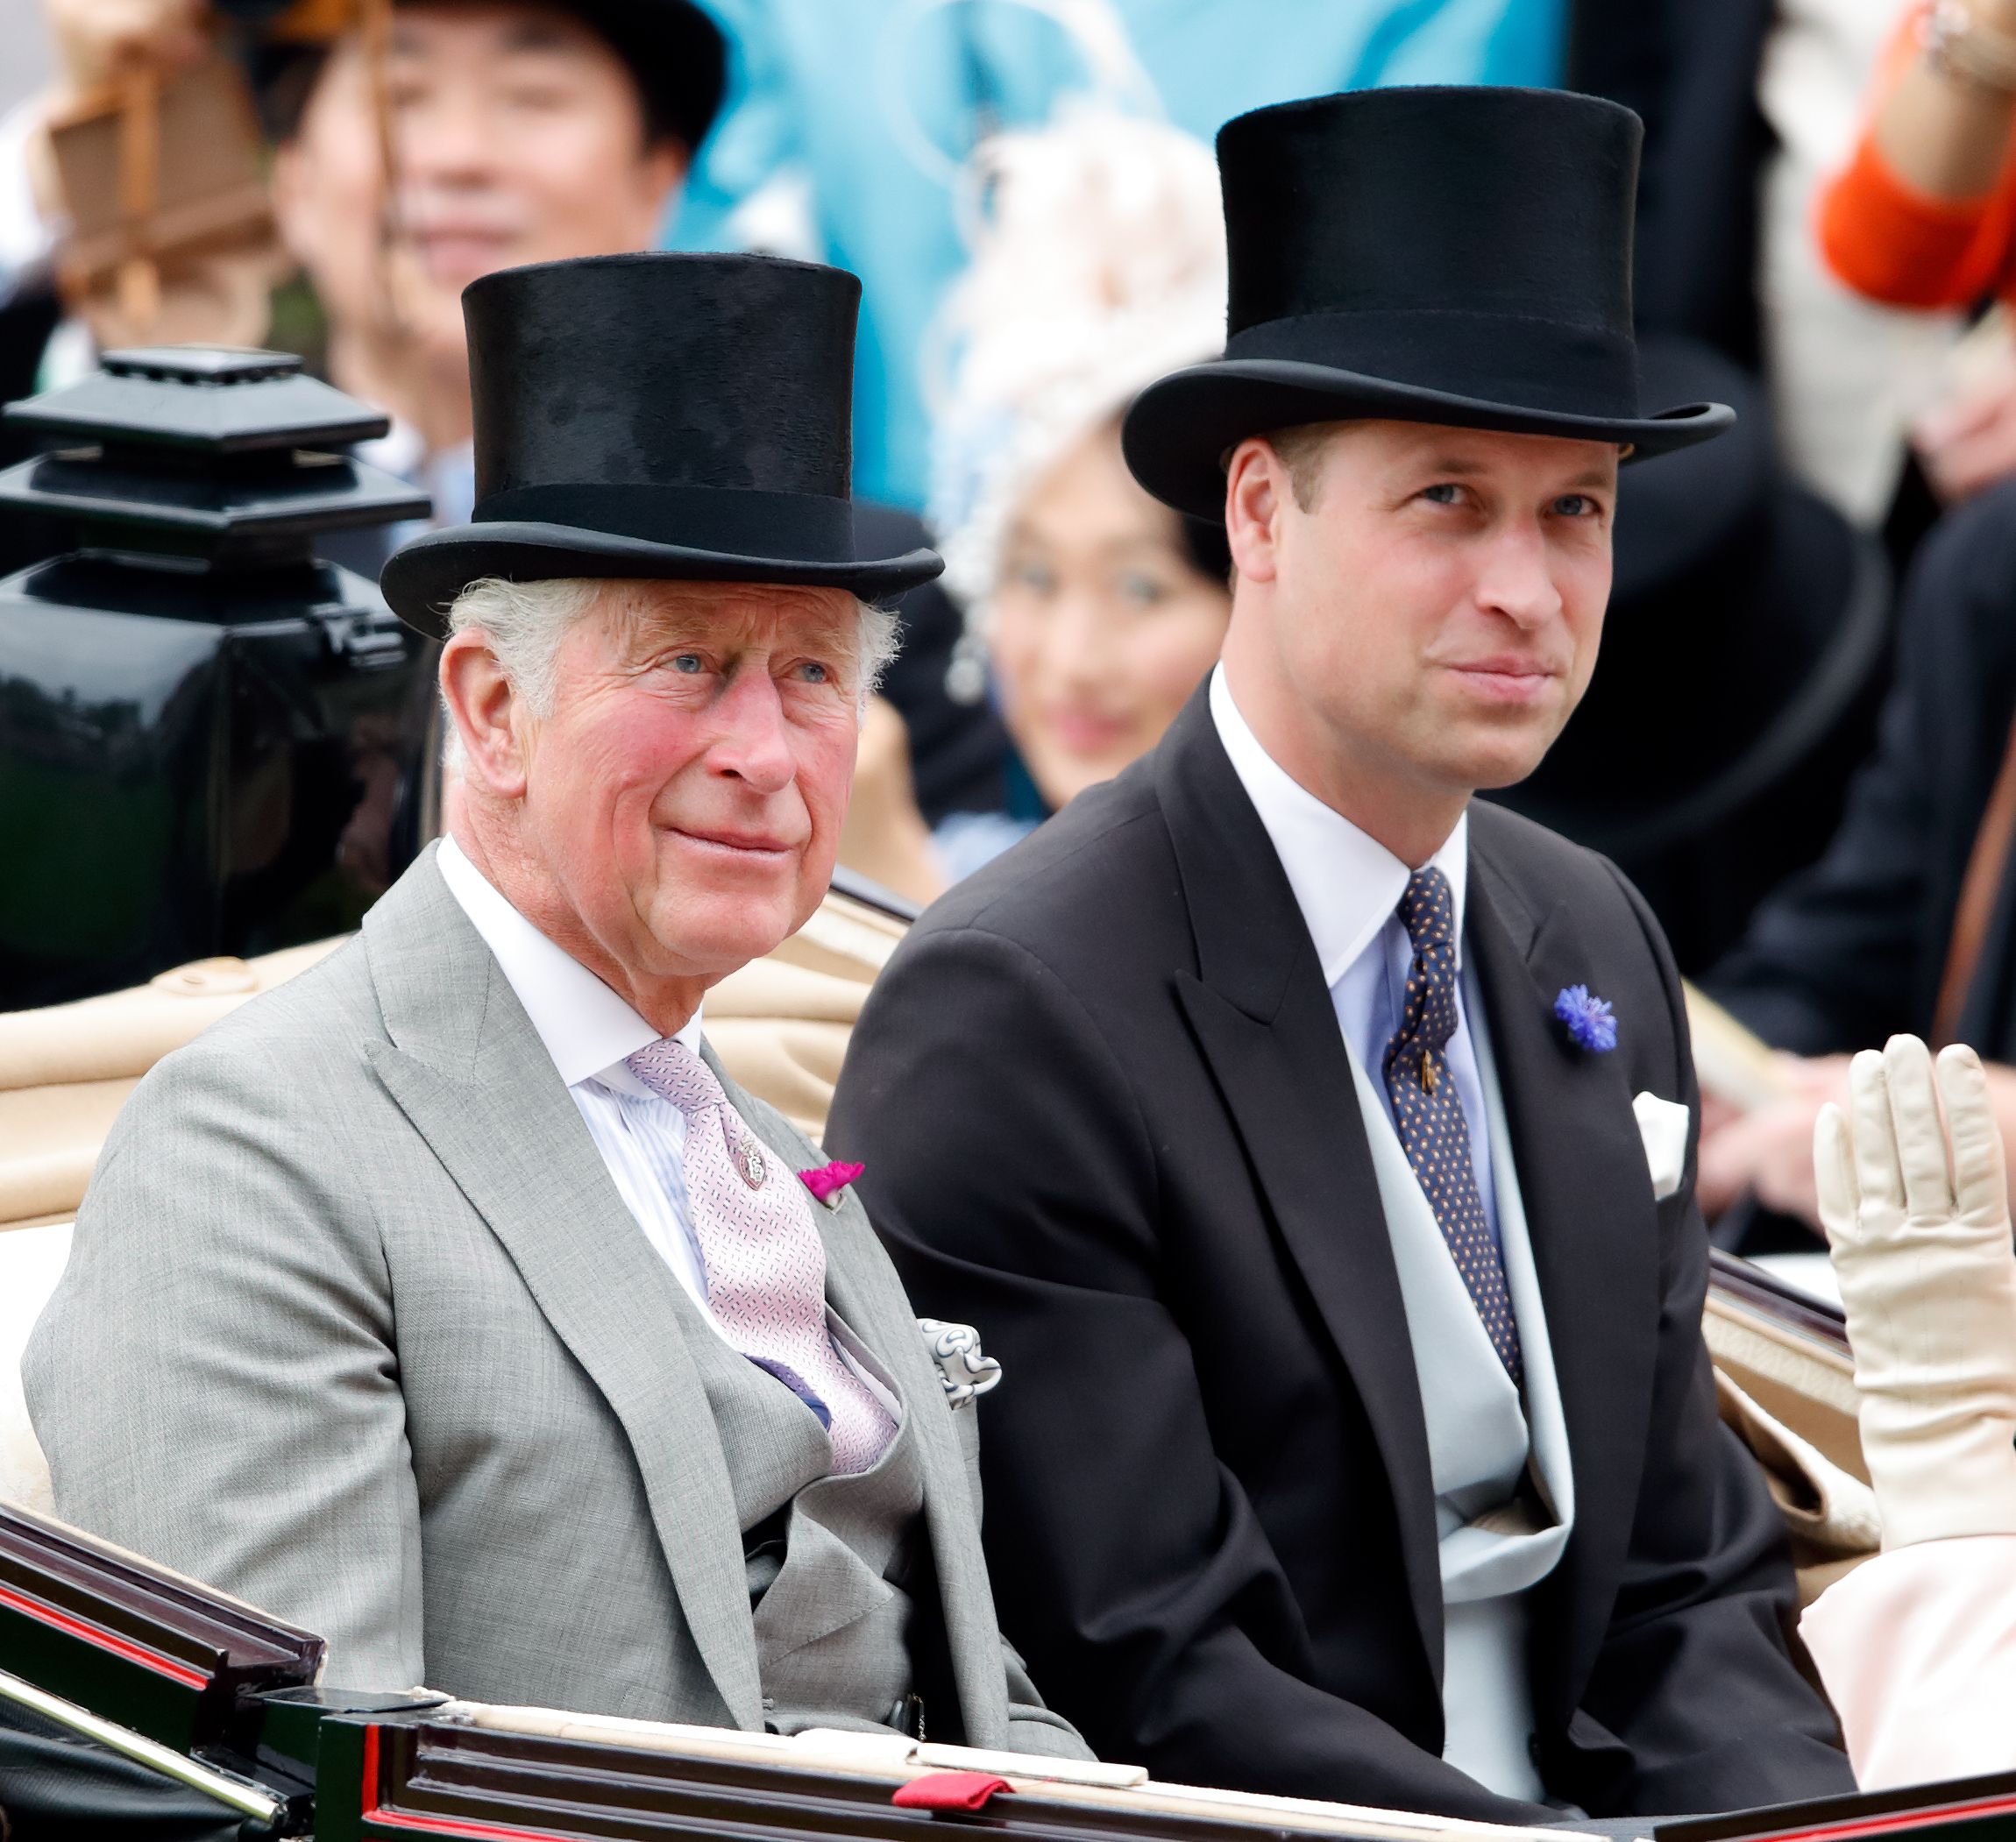 Charles, Prince of Wales and Prince William, Duke of Cambridge at the Ascot Racecourse on June 18, 2019 in Ascot, England | Source: Getty Images